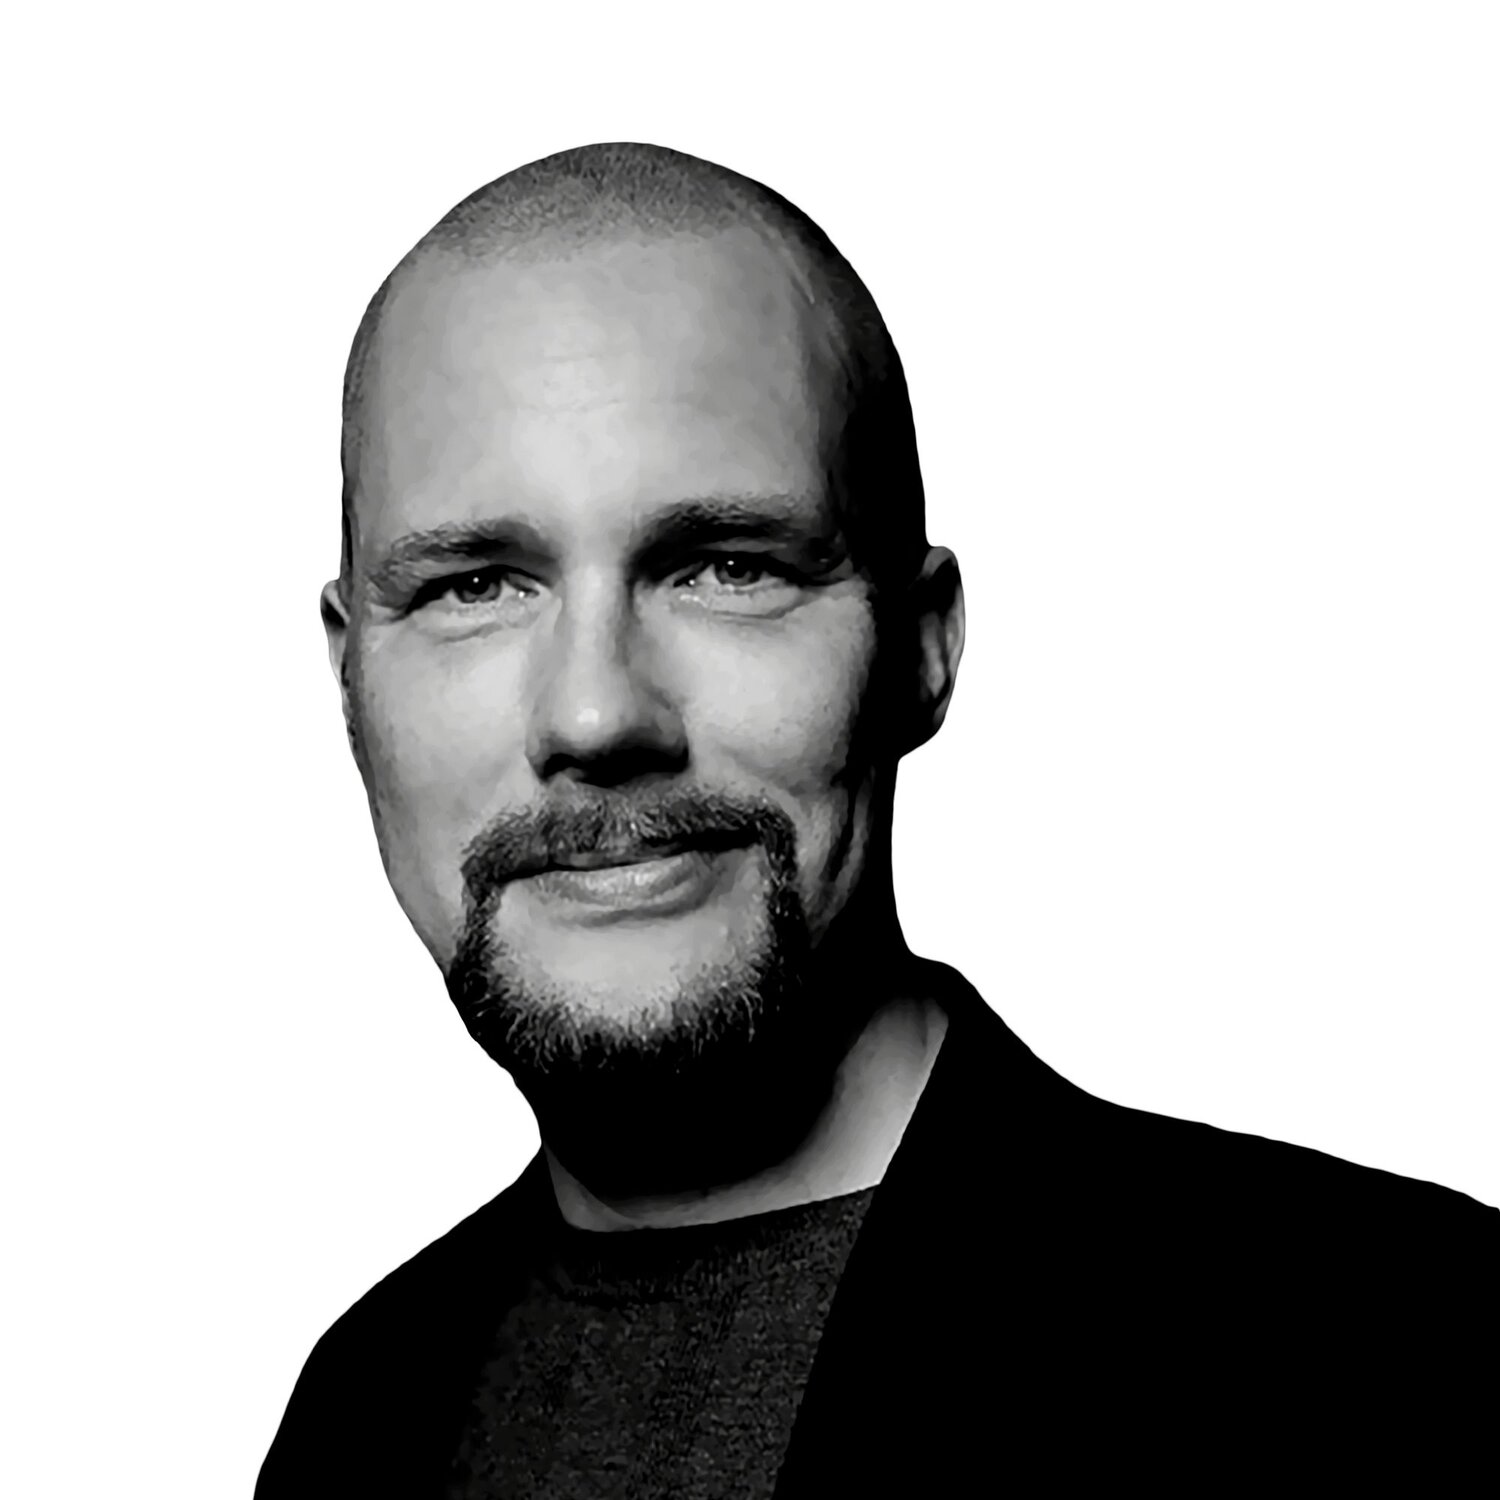 Jonas Andrulis Black and white portrait of a smiling man with a shaved head and a goatee, wearing a blazer, set against a plain background.